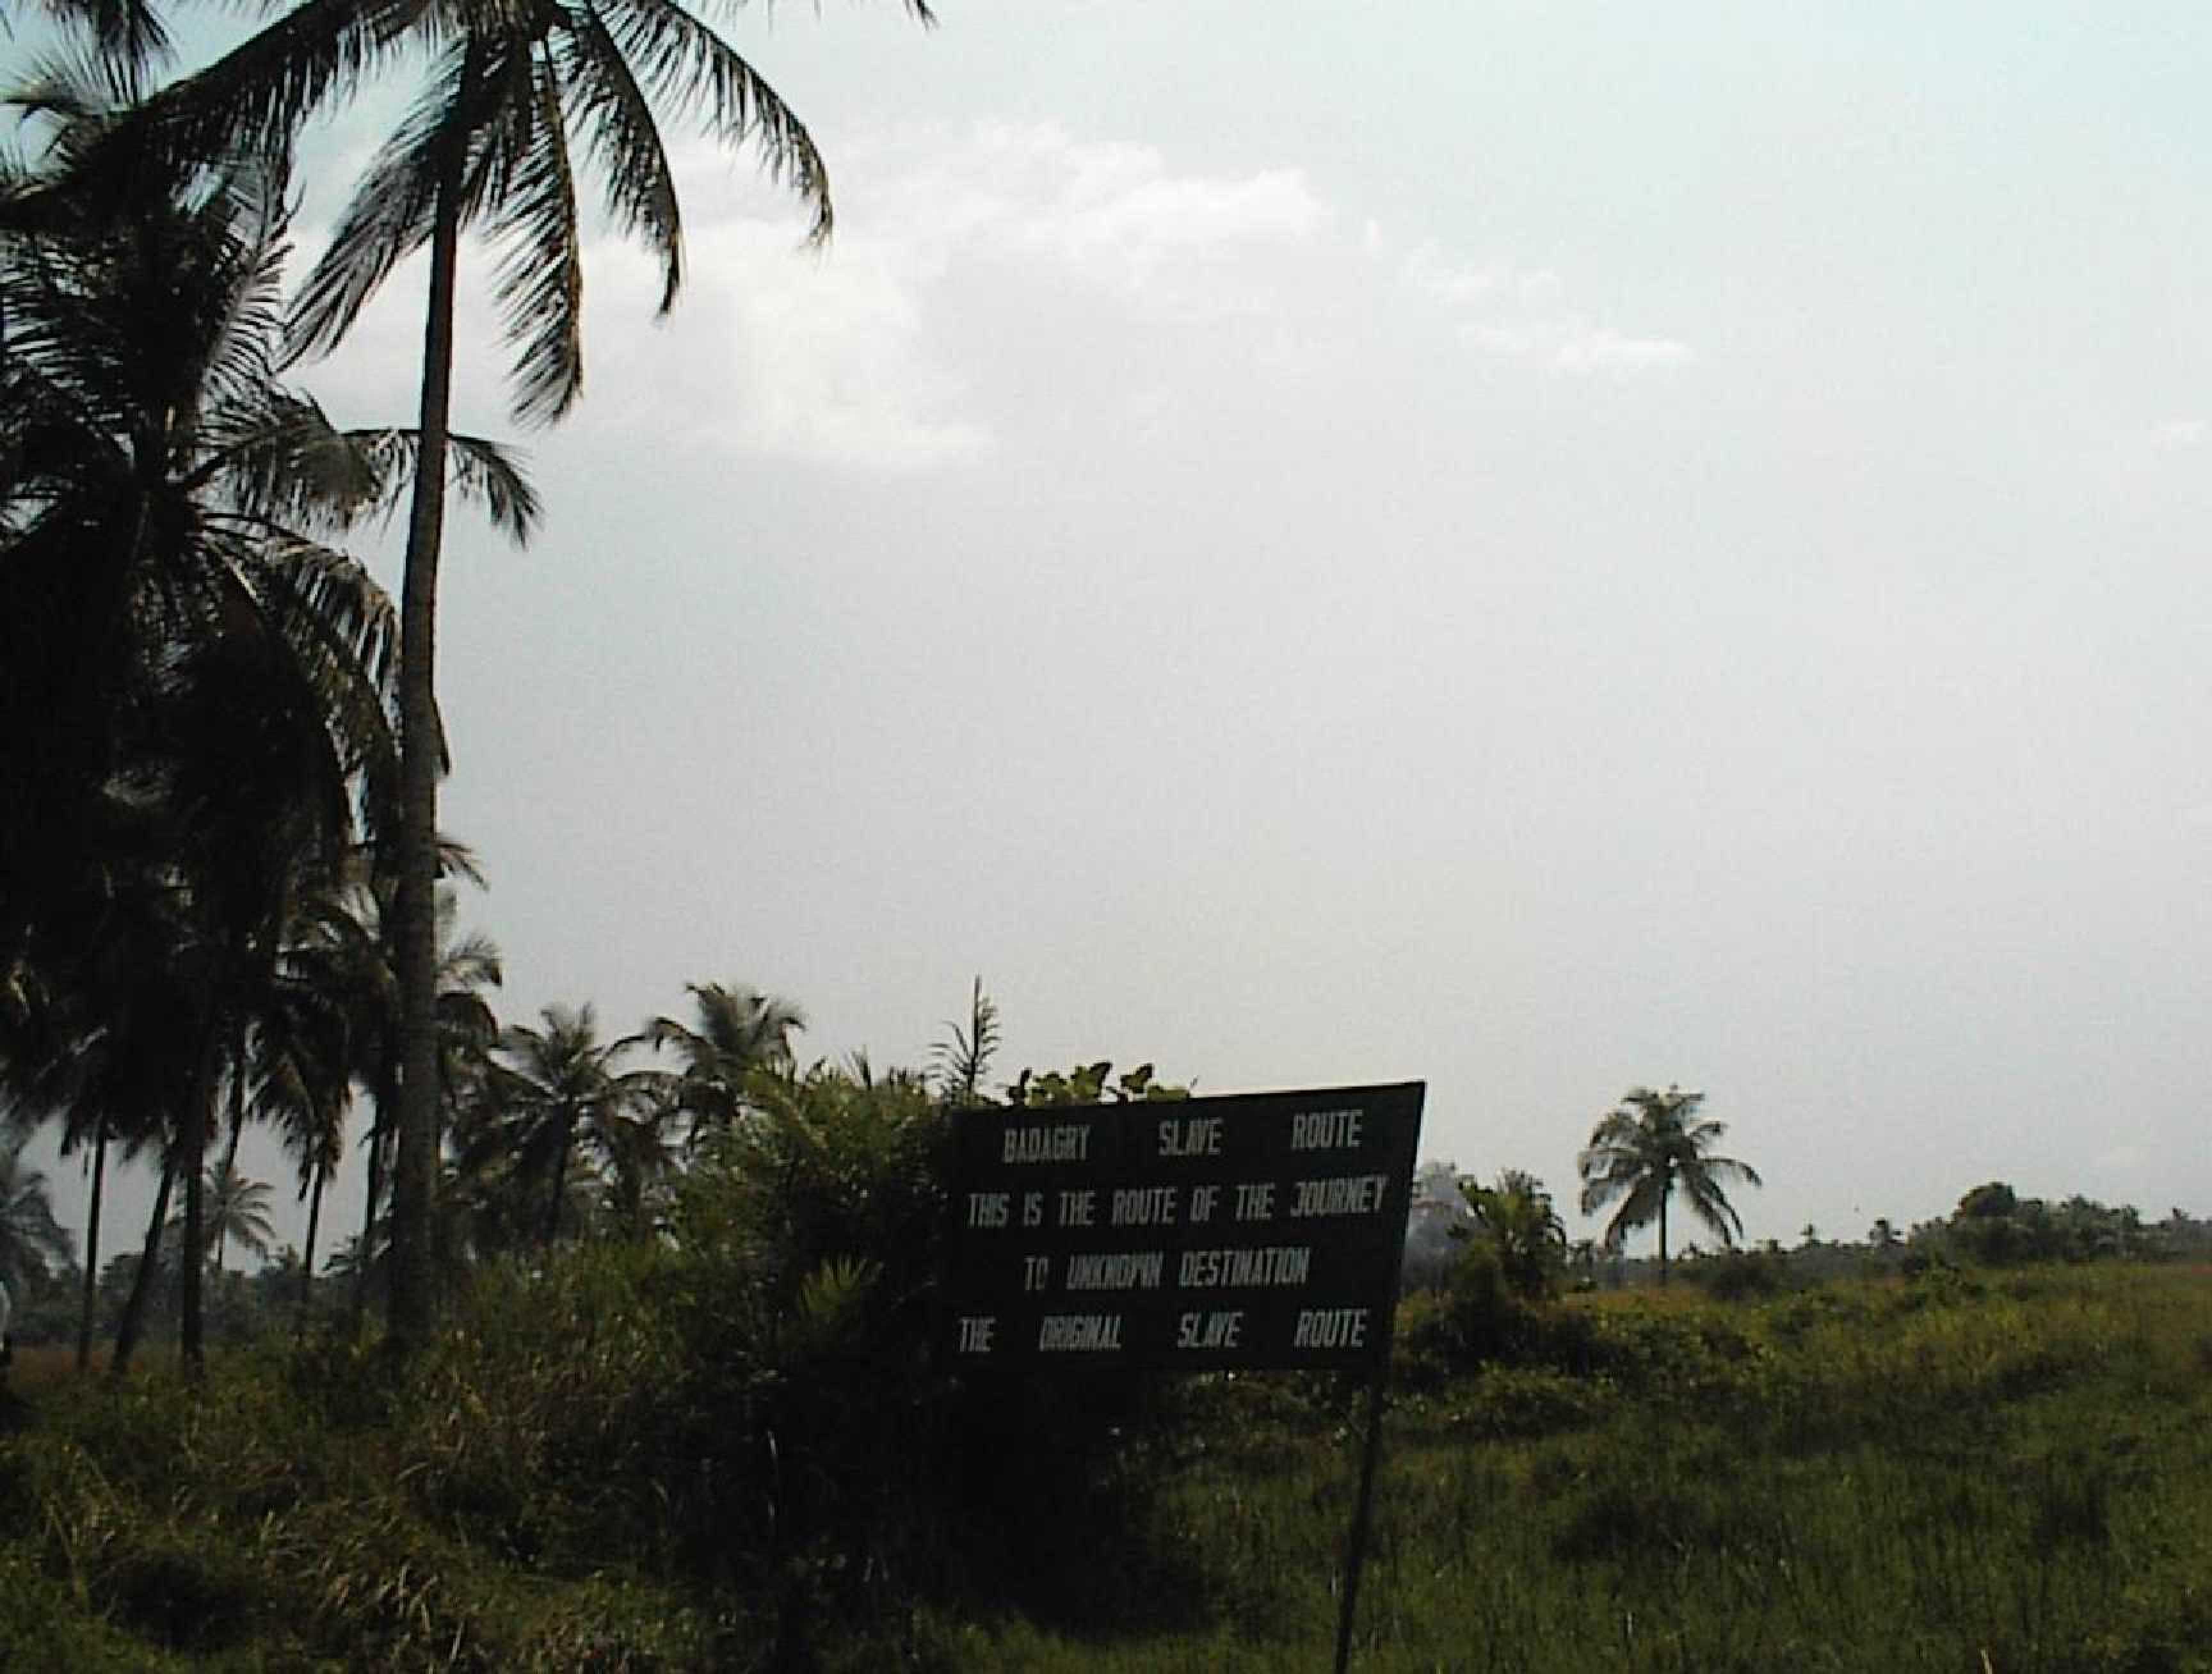 The Coconut Island, in Badagry.  The slave routes cuts through this island on its way to the Atlantic.